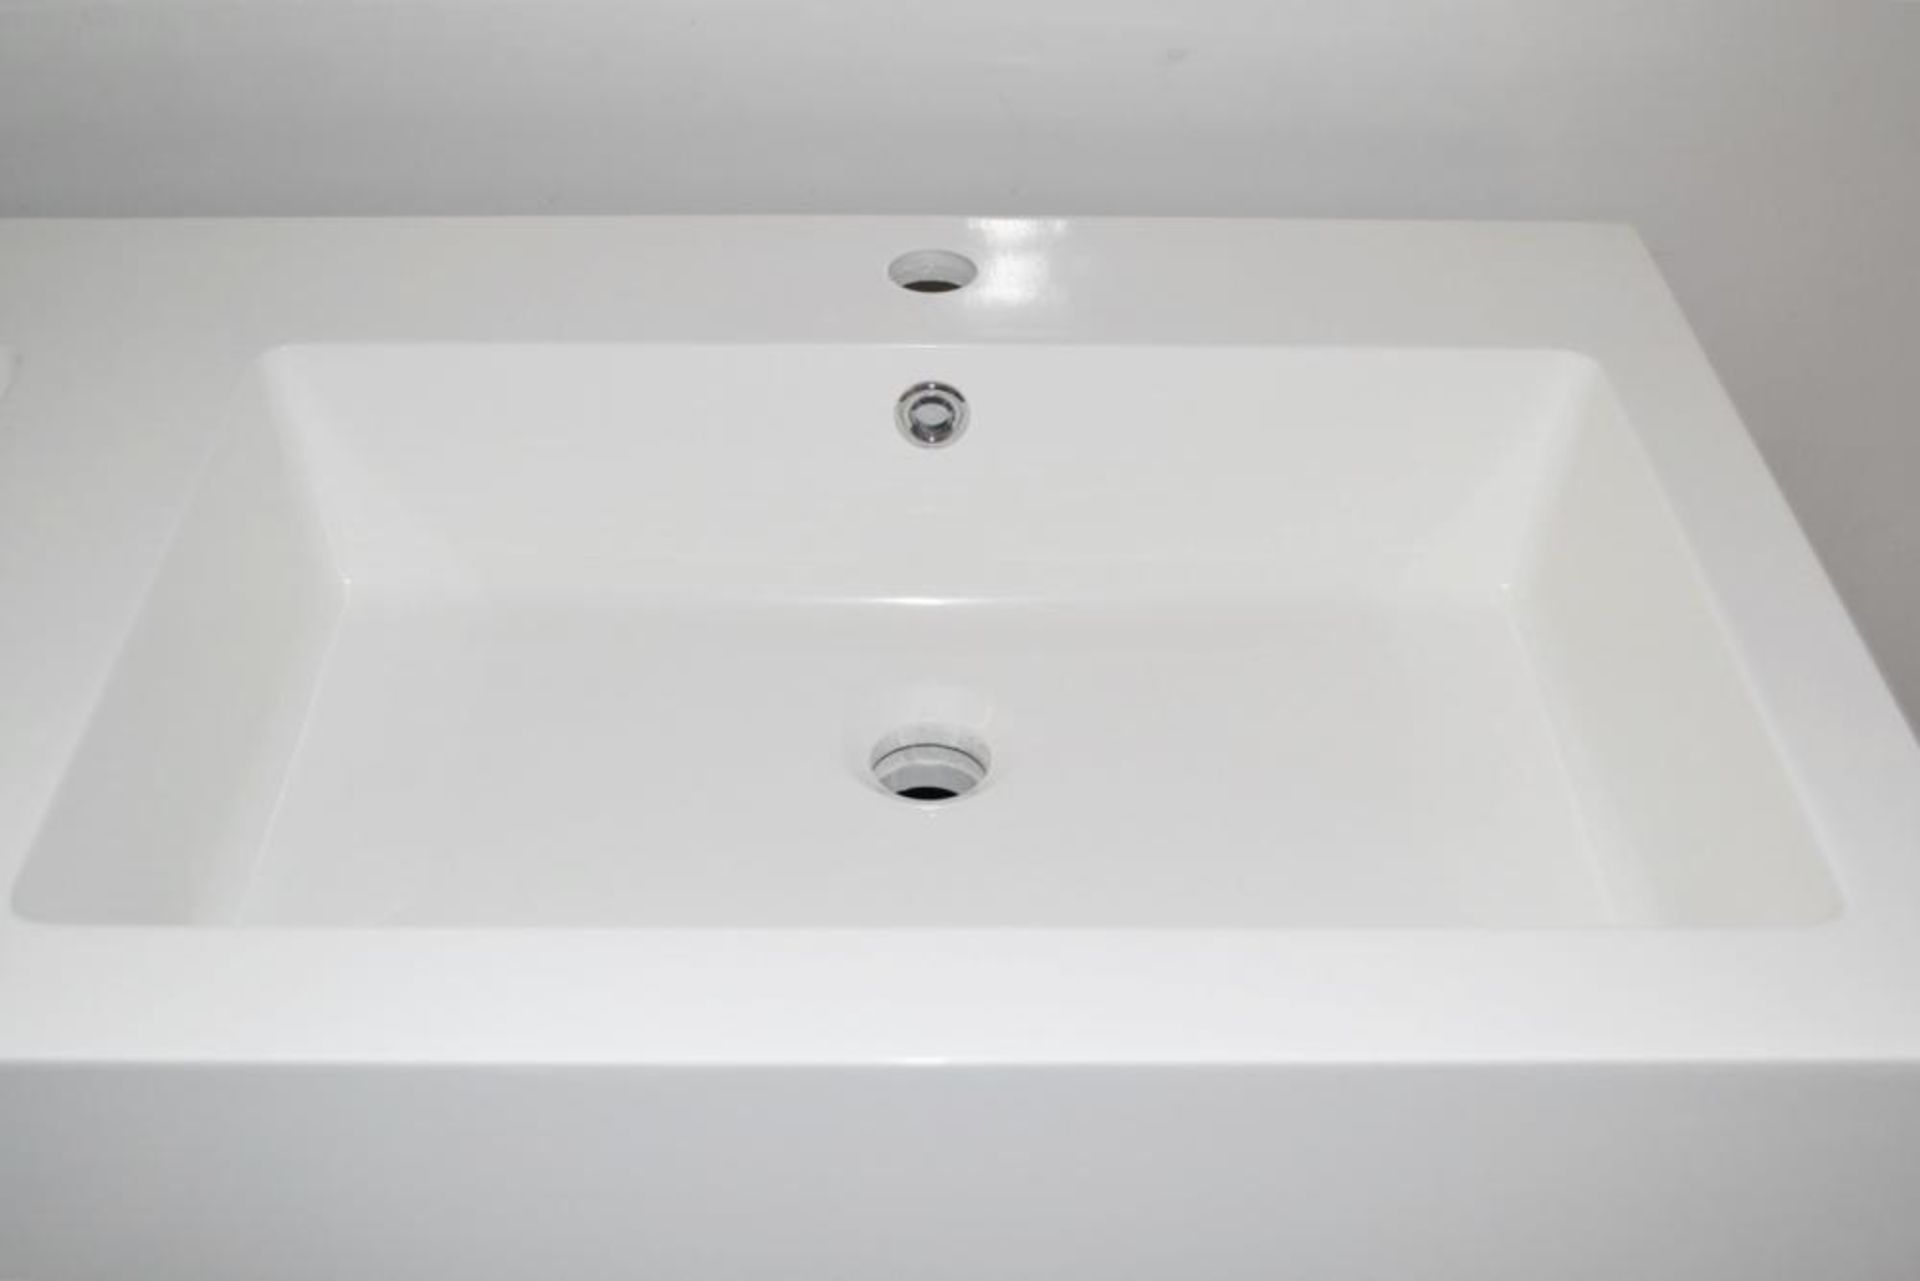 JOB LOT of 10 x Gloss White 1200mm 4-Door Double Basin Freestanding Bathroom Cabinet - New & Boxed - Image 4 of 7